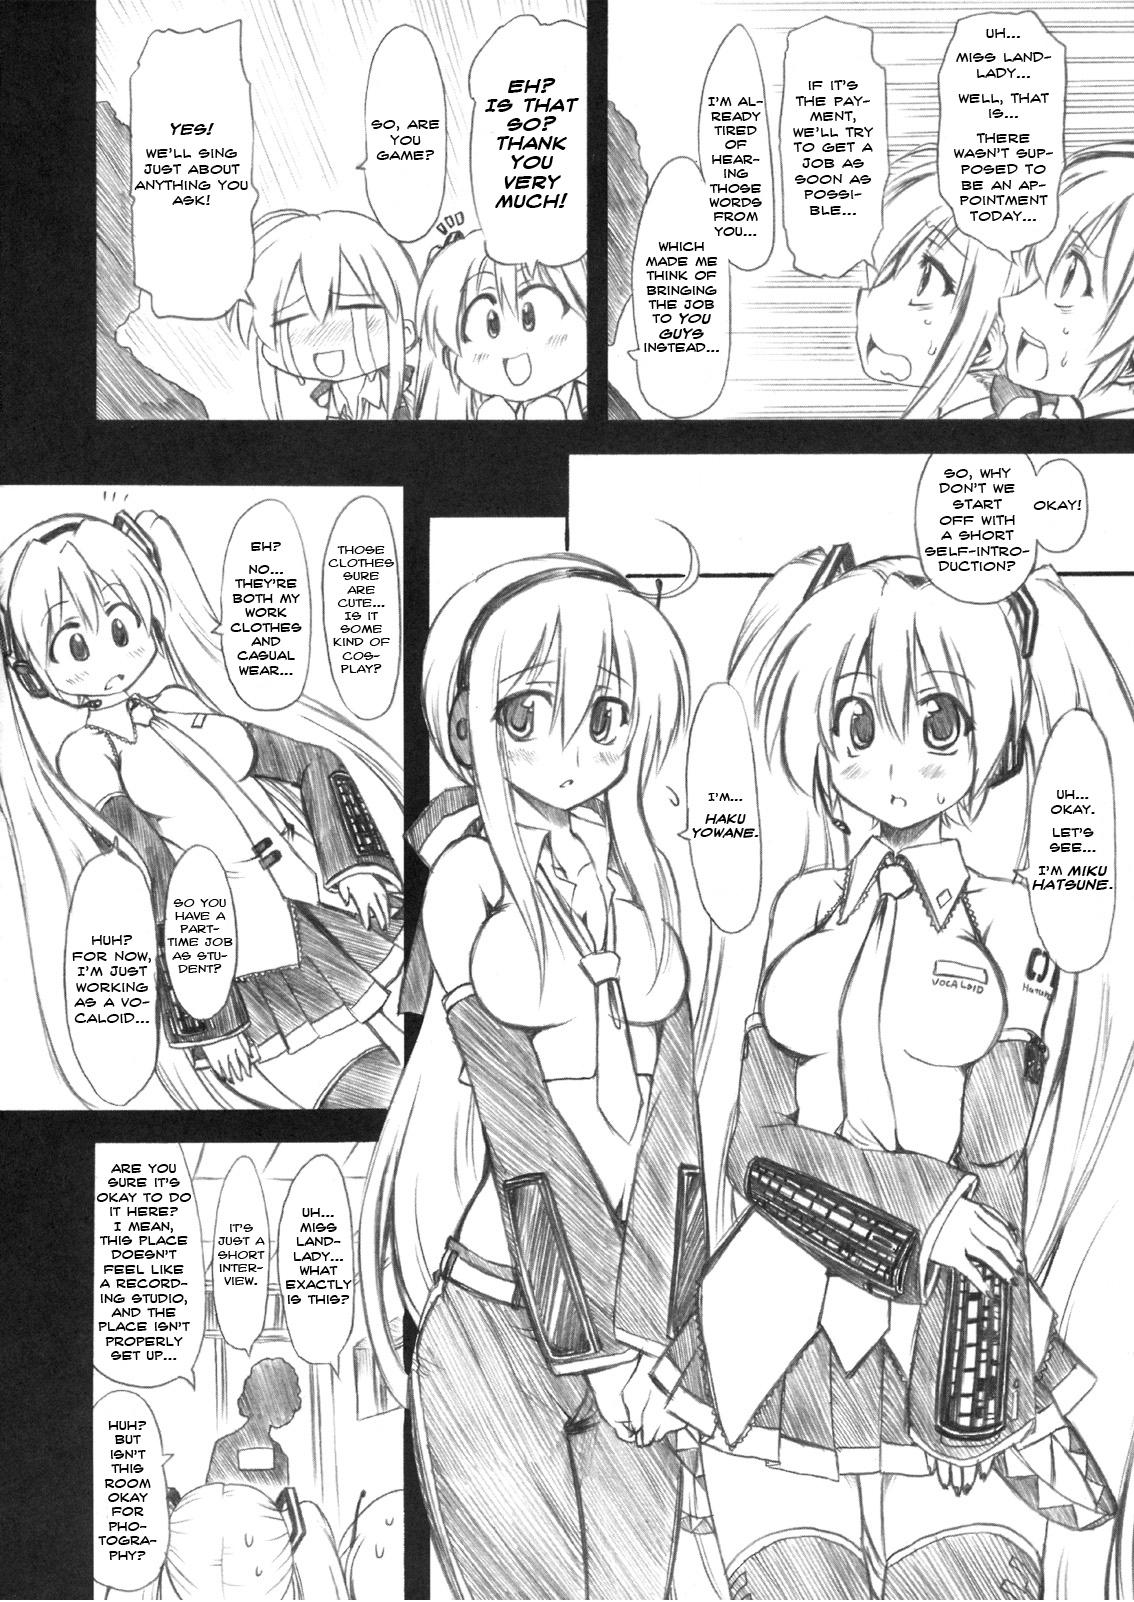 Paja Sweet Room | Chic & Room - Vocaloid Cheating Wife - Page 5